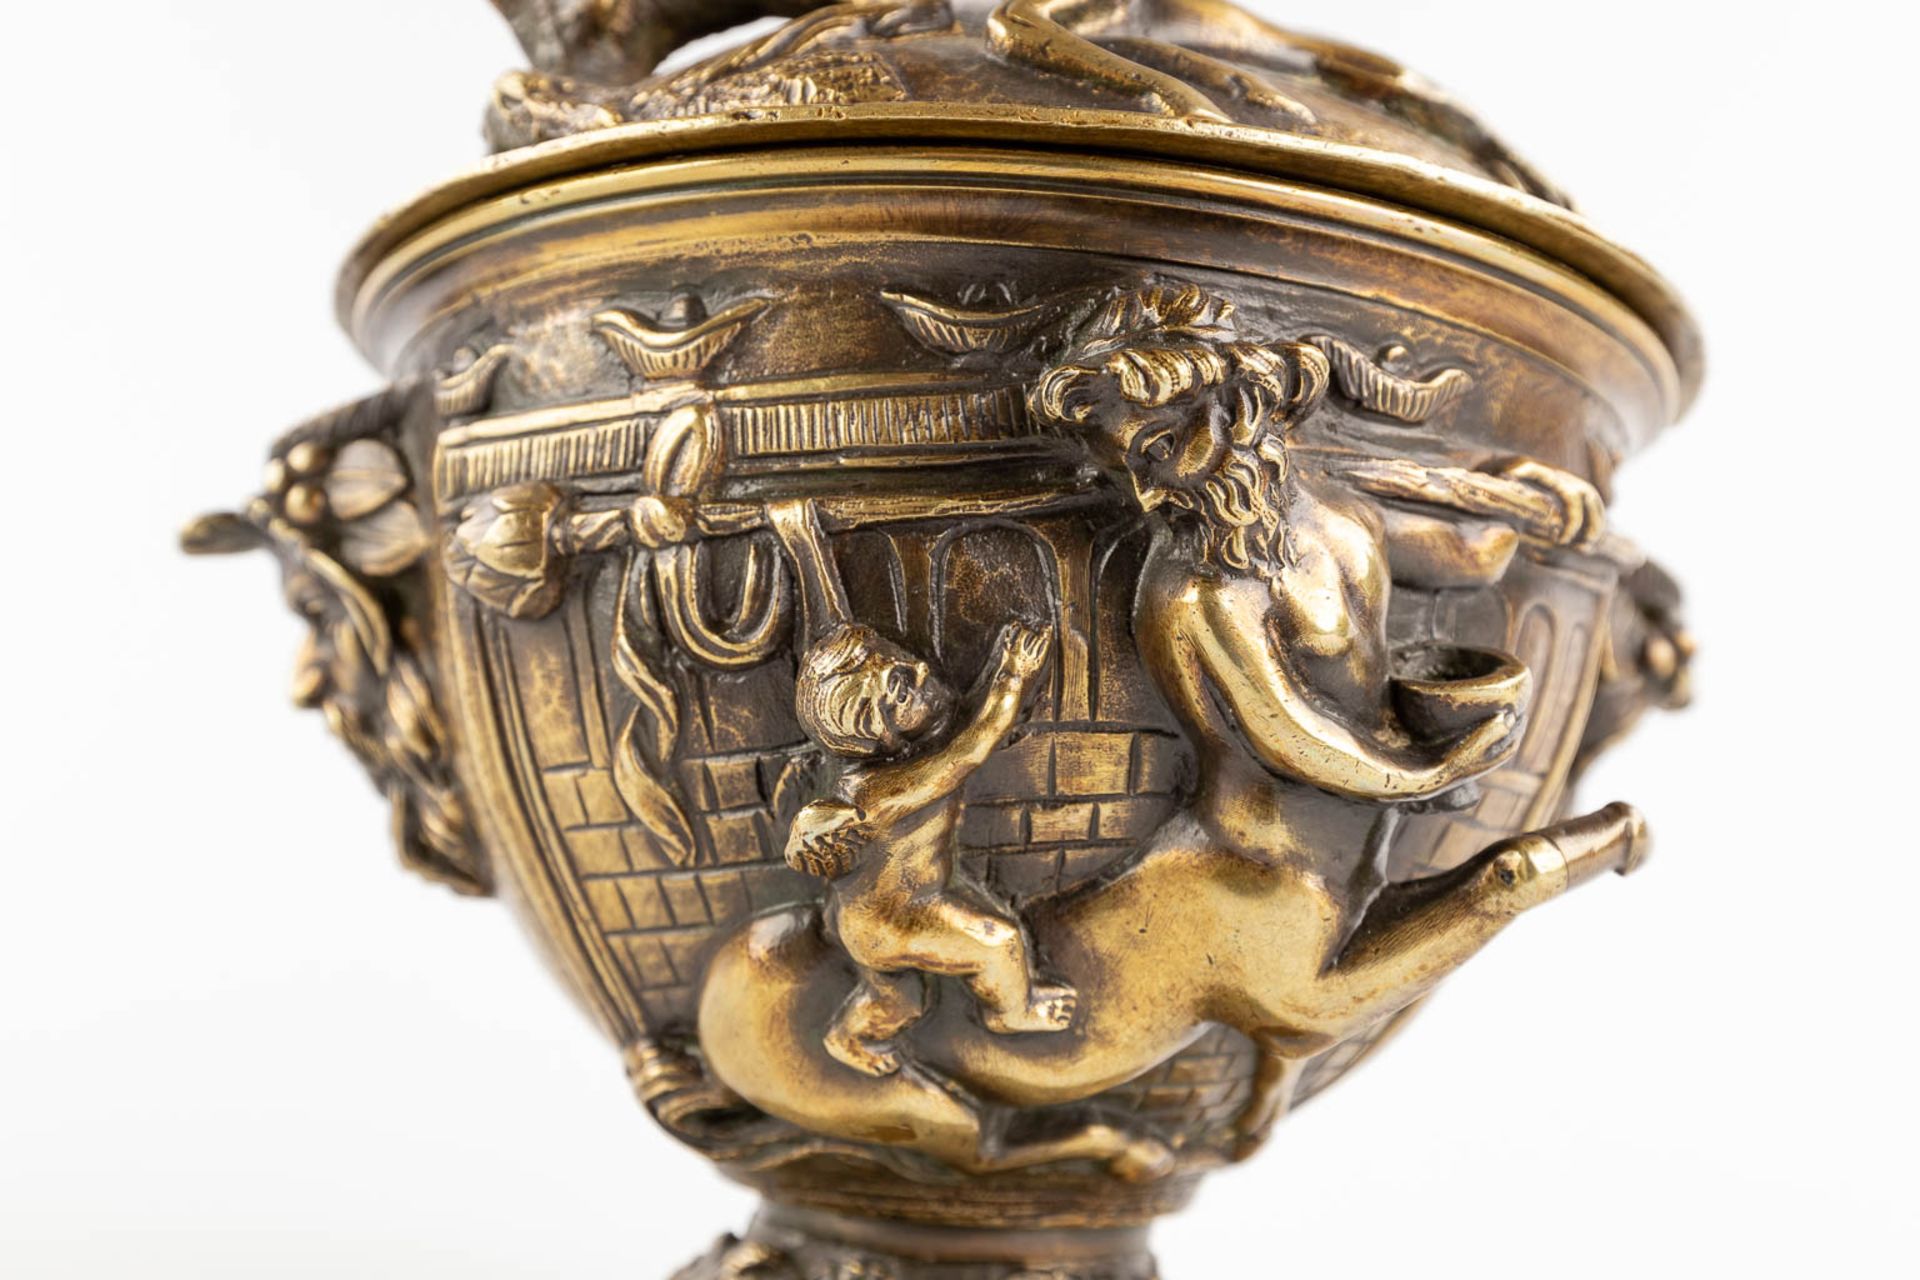 A pot with a lid, decorated with mythological figurines, patinated bronze. (H:23 x D:16 cm) - Image 15 of 16